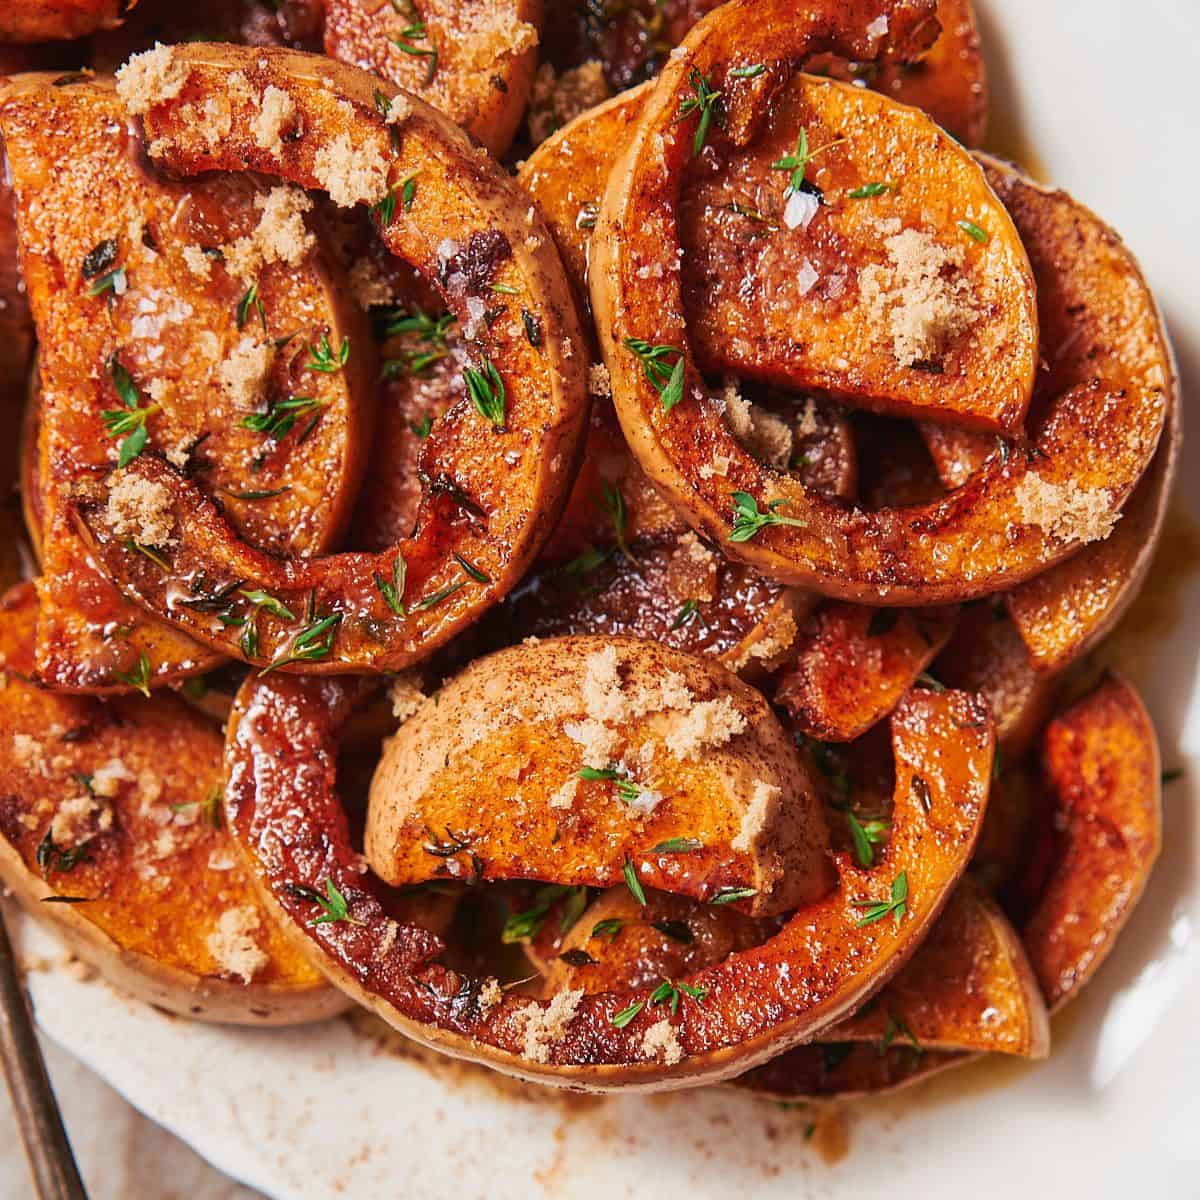 Roasted Butternut Squash with Brown Sugar.